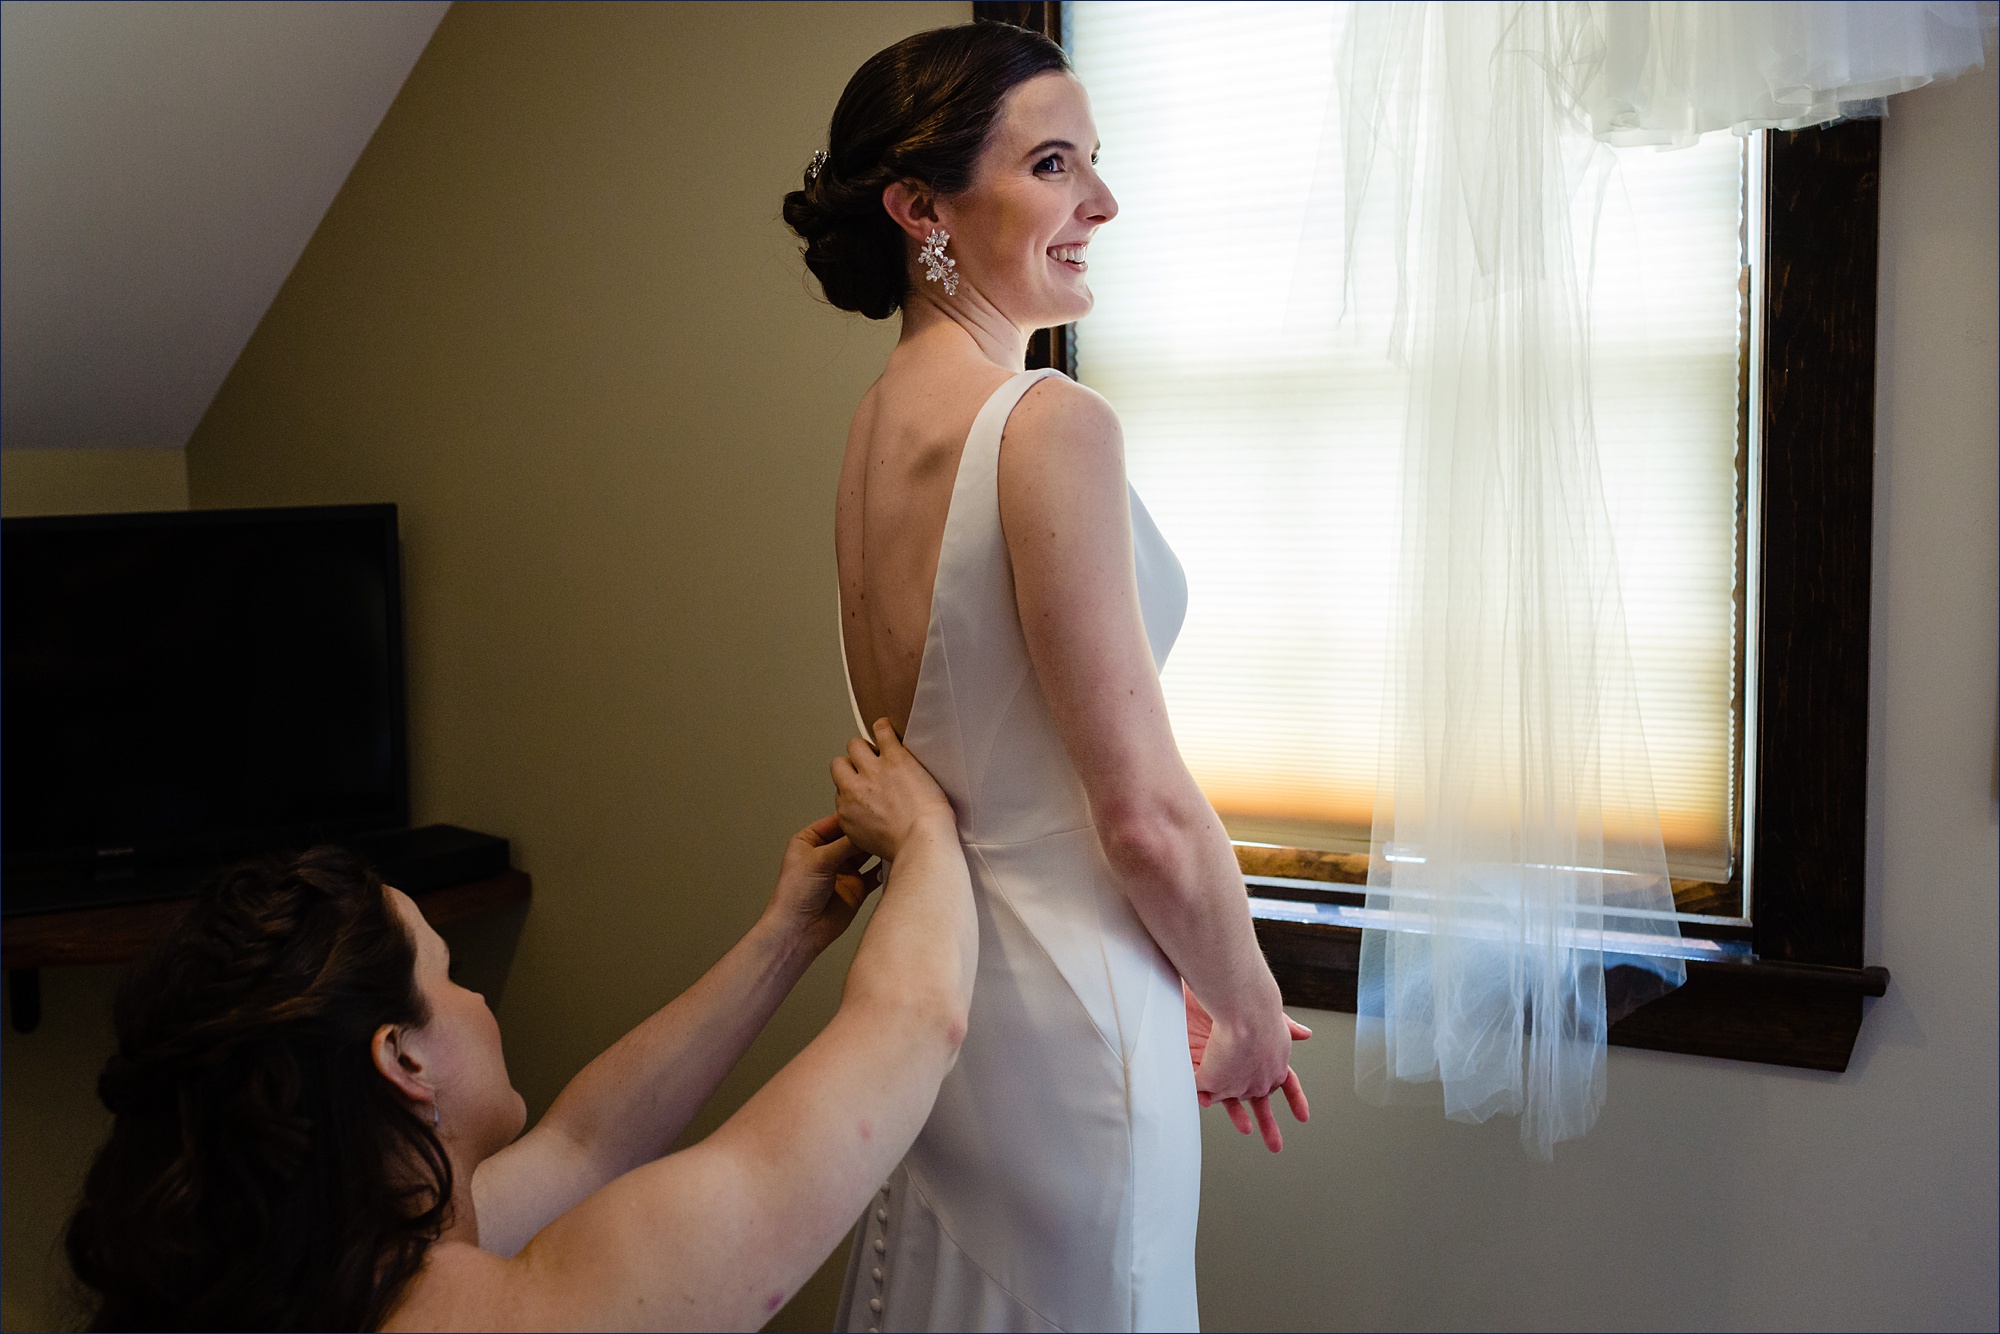 The bride gets into her dress and smiles